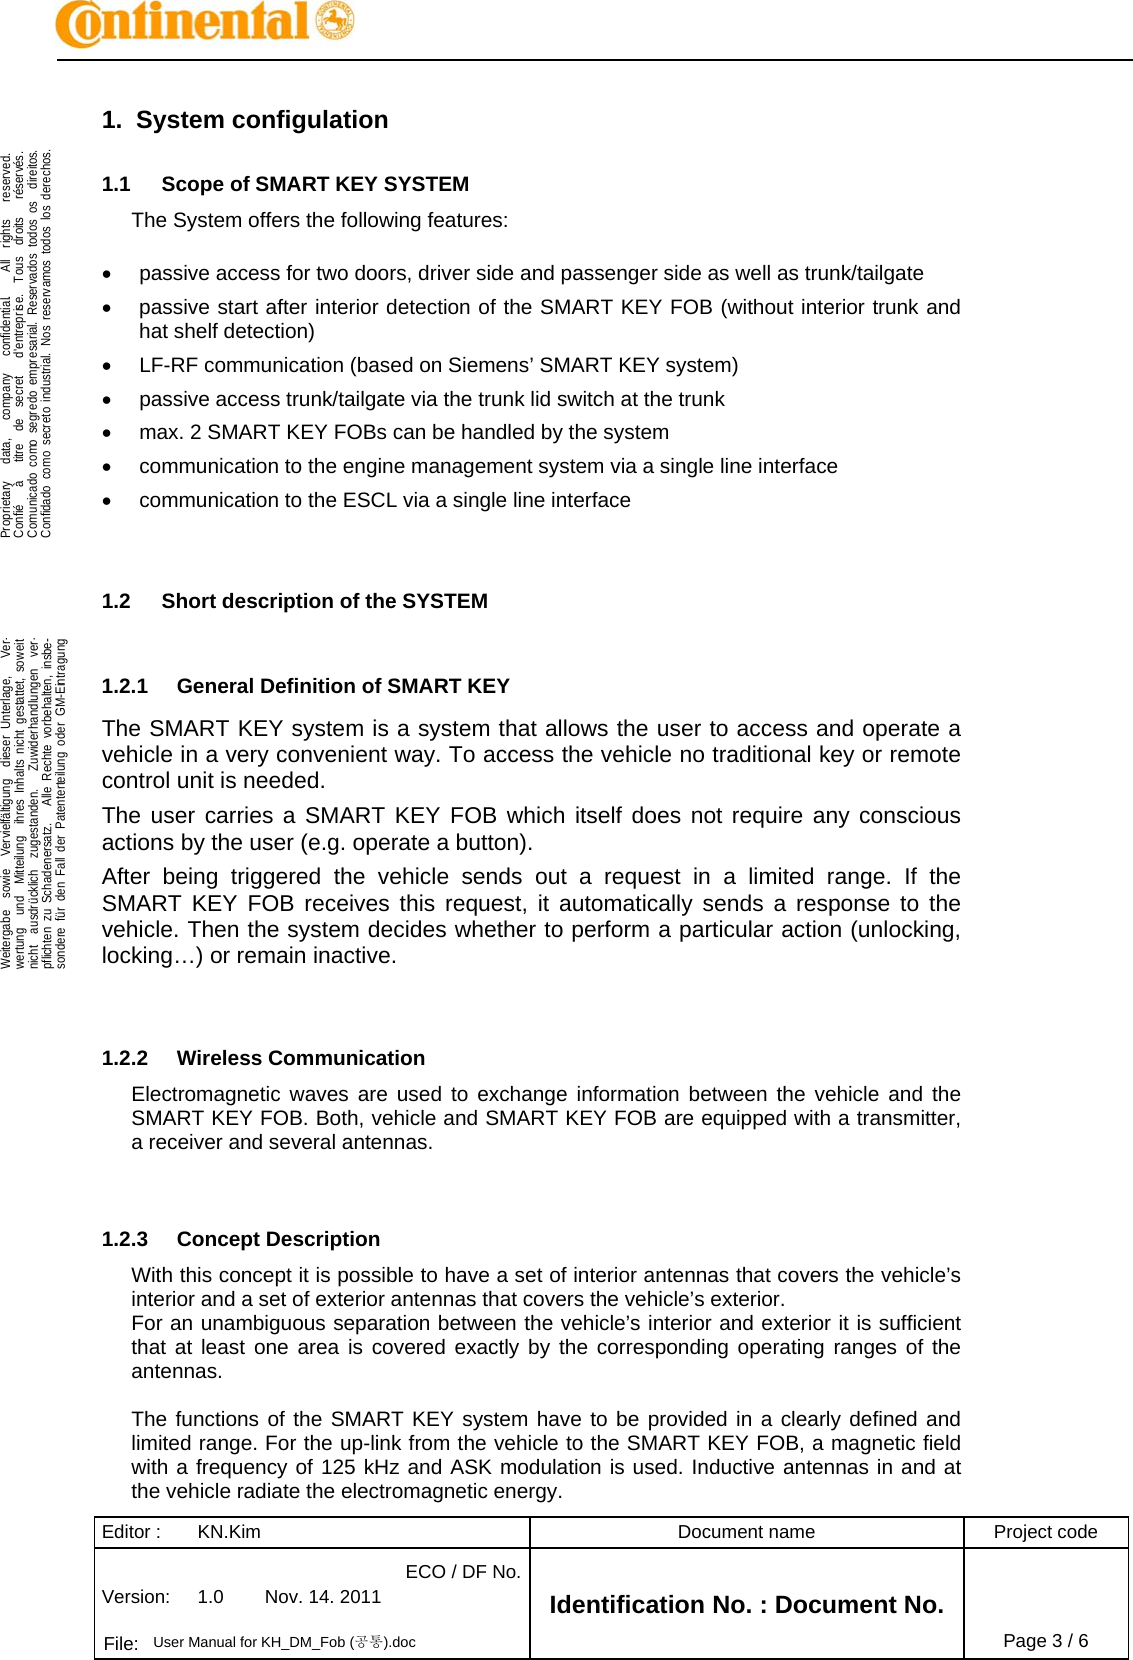 Editor :  KN.Kim  Document name  Project code Version:  1.0  Nov. 14. 2011 ECO / DF No.Identification No. : Document No.   File:  User Manual for KH_DM_Fob (공통).doc Page 3 / 6    .Proprietary   data,   company   confidential.    All  rights   reserved.Confié   à   titre  de  secret   d&apos;entreprise.  Tous  droits   réservés.Com arial  todos os os.Conf Nos  todos los os.  .Weitergabe  sowie  Vervielfältigung  dieser Unterlage,   Verunicaidado do comcomo o segr secret edo o indusemprestrial.  . Rese reservrvadosamos   direit derech-wertung  und  Mitteilung  ihres Inhalts nicht gestattet, soweitnicht  ausdrücklich  zugestanden.   Zuwiderhandl   verungen-pflichten zu Schadenersatz.   Alle Rechte vorbehal nsbe-sondere für den Fall der Patenterteilung oder GM agung  ten, i-Eintr1.2.1  General Definition of SMART KEY 1.  System configulation 1.1  Scope of SMART KEY SYSTEM The System offers the following features:  •  passive access for two doors, driver side and passenger side as well as trunk/tailgate •  passive start after interior detection of the SMART KEY FOB (without interior trunk and hat shelf detection) •  LF-RF communication (based on Siemens’ SMART KEY system) •  passive access trunk/tailgate via the trunk lid switch at the trunk •  max. 2 SMART KEY FOBs can be handled by the system •  communication to the engine management system via a single line interface •  communication to the ESCL via a single line interface   1.2  Short description of the SYSTEM  The SMART KEY system is a system that allows the user to access and operate a vehicle in a very convenient way. To access the vehicle no traditional key or remote control unit is needed.  The user carries a SMART KEY FOB which itself does not require any conscious actions by the user (e.g. operate a button).  After being triggered the vehicle sends out a request in a limited range. If the SMART KEY FOB receives this request, it automatically sends a response to the vehicle. Then the system decides whether to perform a particular action (unlocking, locking…) or remain inactive.   1.2.2  Wireless Communication Electromagnetic waves are used to exchange information between the vehicle and the SMART KEY FOB. Both, vehicle and SMART KEY FOB are equipped with a transmitter, a receiver and several antennas.    1.2.3  Concept Description With this concept it is possible to have a set of interior antennas that covers the vehicle’s interior and a set of exterior antennas that covers the vehicle’s exterior. For an unambiguous separation between the vehicle’s interior and exterior it is sufficient that at least one area is covered exactly by the corresponding operating ranges of the antennas.  The functions of the SMART KEY system have to be provided in a clearly defined and limited range. For the up-link from the vehicle to the SMART KEY FOB, a magnetic field with a frequency of 125 kHz and ASK modulation is used. Inductive antennas in and at the vehicle radiate the electromagnetic energy. 